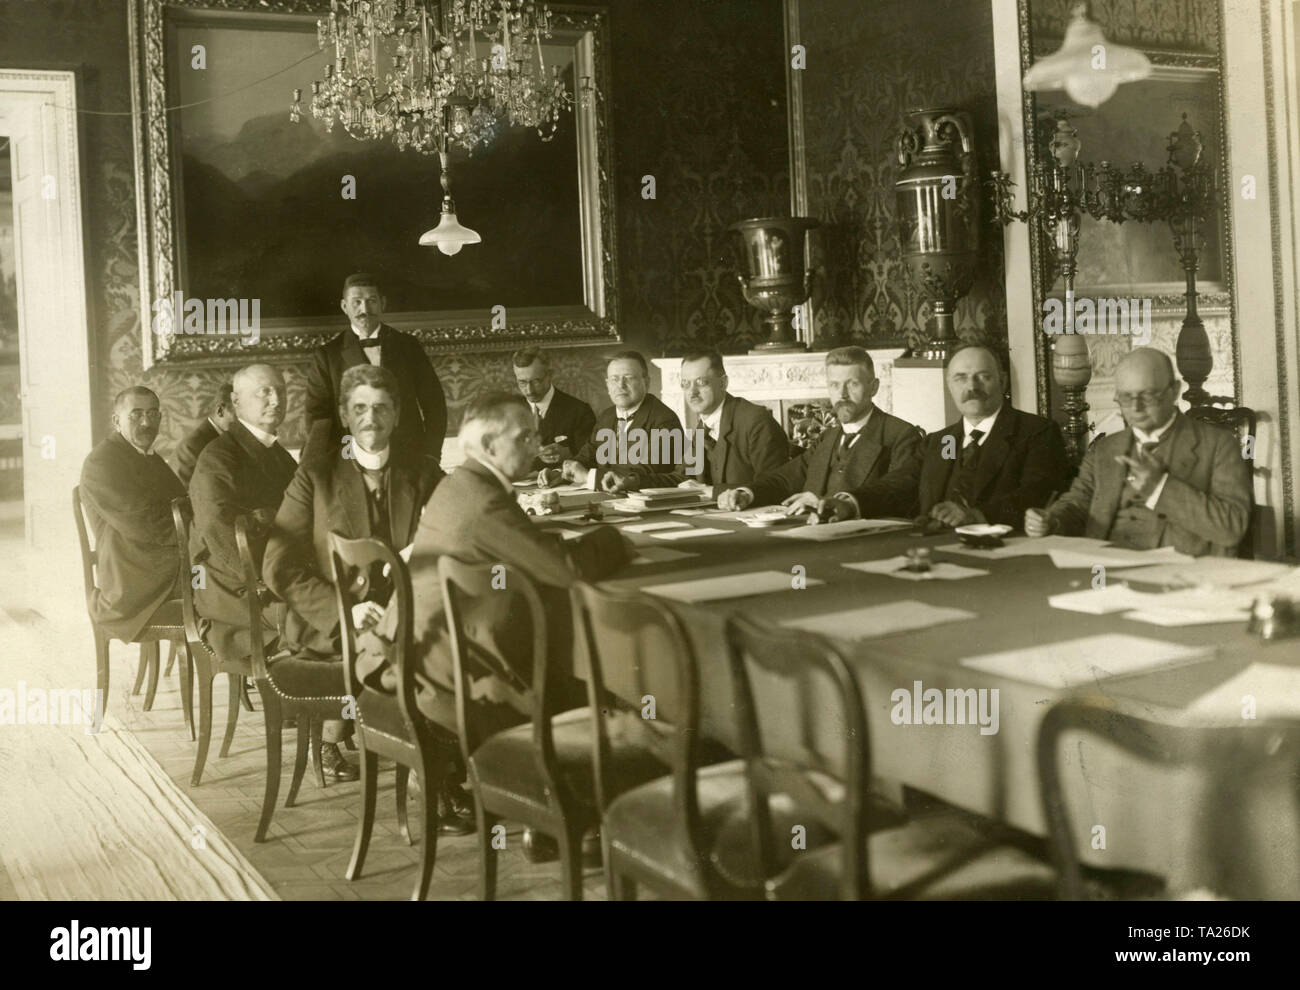 Members of the National Assembly at a meeting in the Reich Chancellery in Weimar. From left: Minister Adolf Neumann-Hofer, Reich Postal Minister General Johannes Giesberts, Reich Economics Minister Rudolf Wissel, Reich Foreign Minister Hermann Mueller, Finance Minister Matthias Erzberger, head of the Reich Chancellery Ludwig Alpers, Prime Minister Gustav Bauer, chief press officer Rauscher, Defense Minister Gustav Noske, Reich Minister of the Treasury Wilhelm Mayer, Labor Minister Alexander Schlicke. Stock Photo